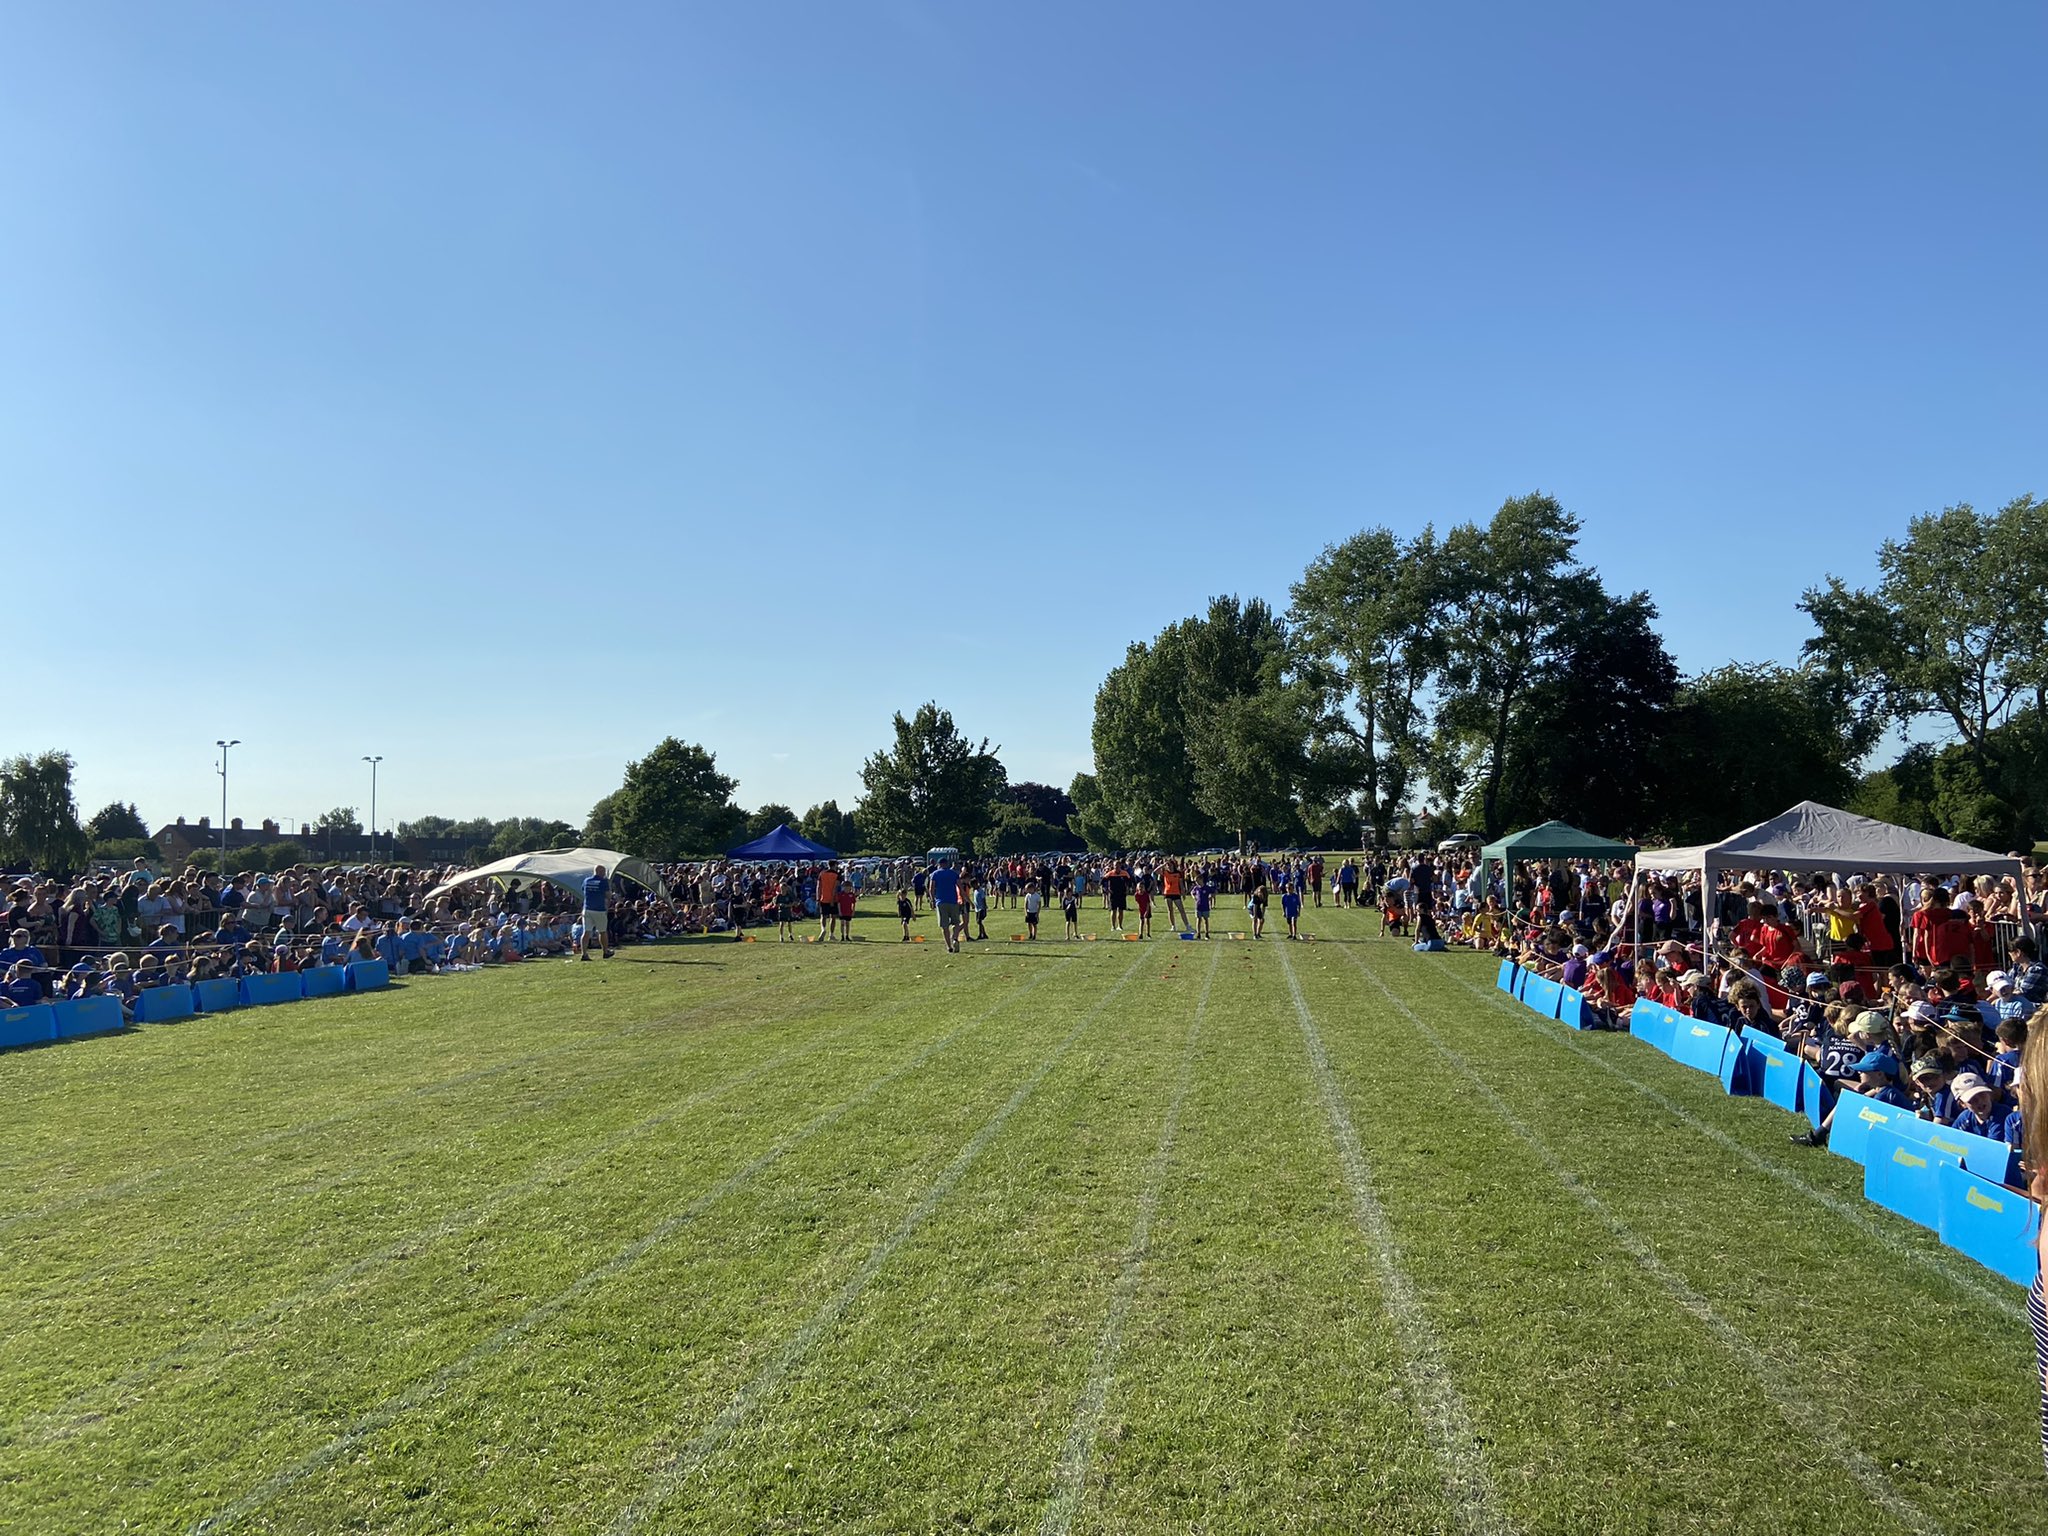 More than 1500 children took part in Town Sports at the Barony, Nantwich on Wednesday - June 22 (Crewe and Nantwich SSP).